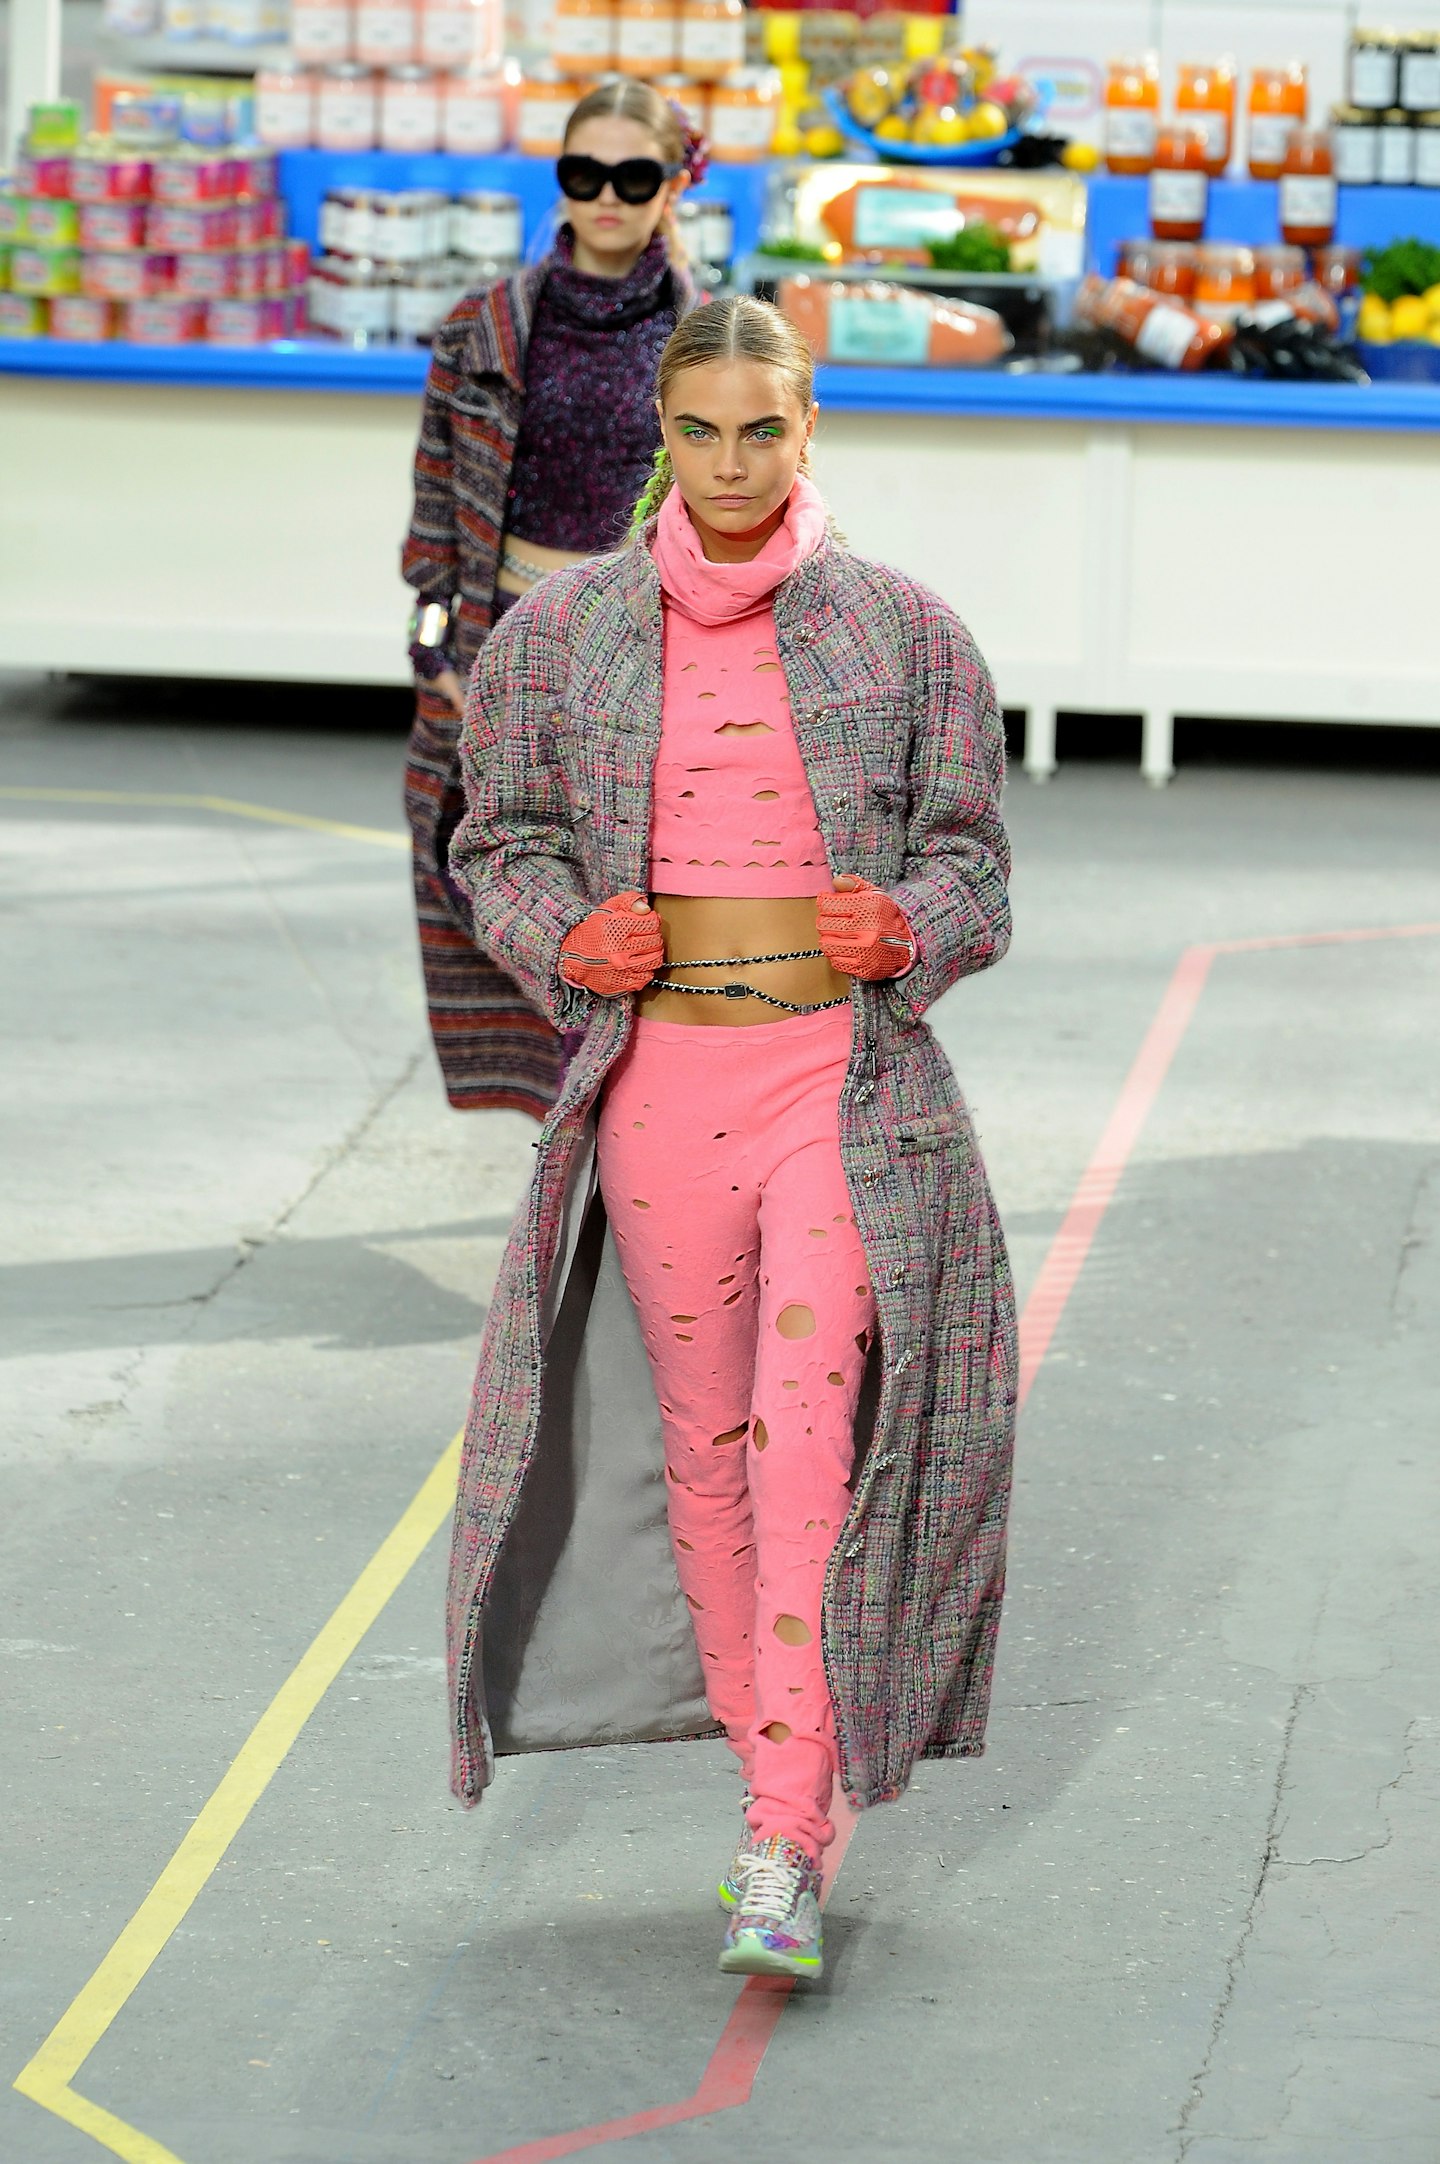 Chanel exhibition catwalk moments Cara Delevingne Walks For The Chanel Fall/Winter 2014-2015 Show